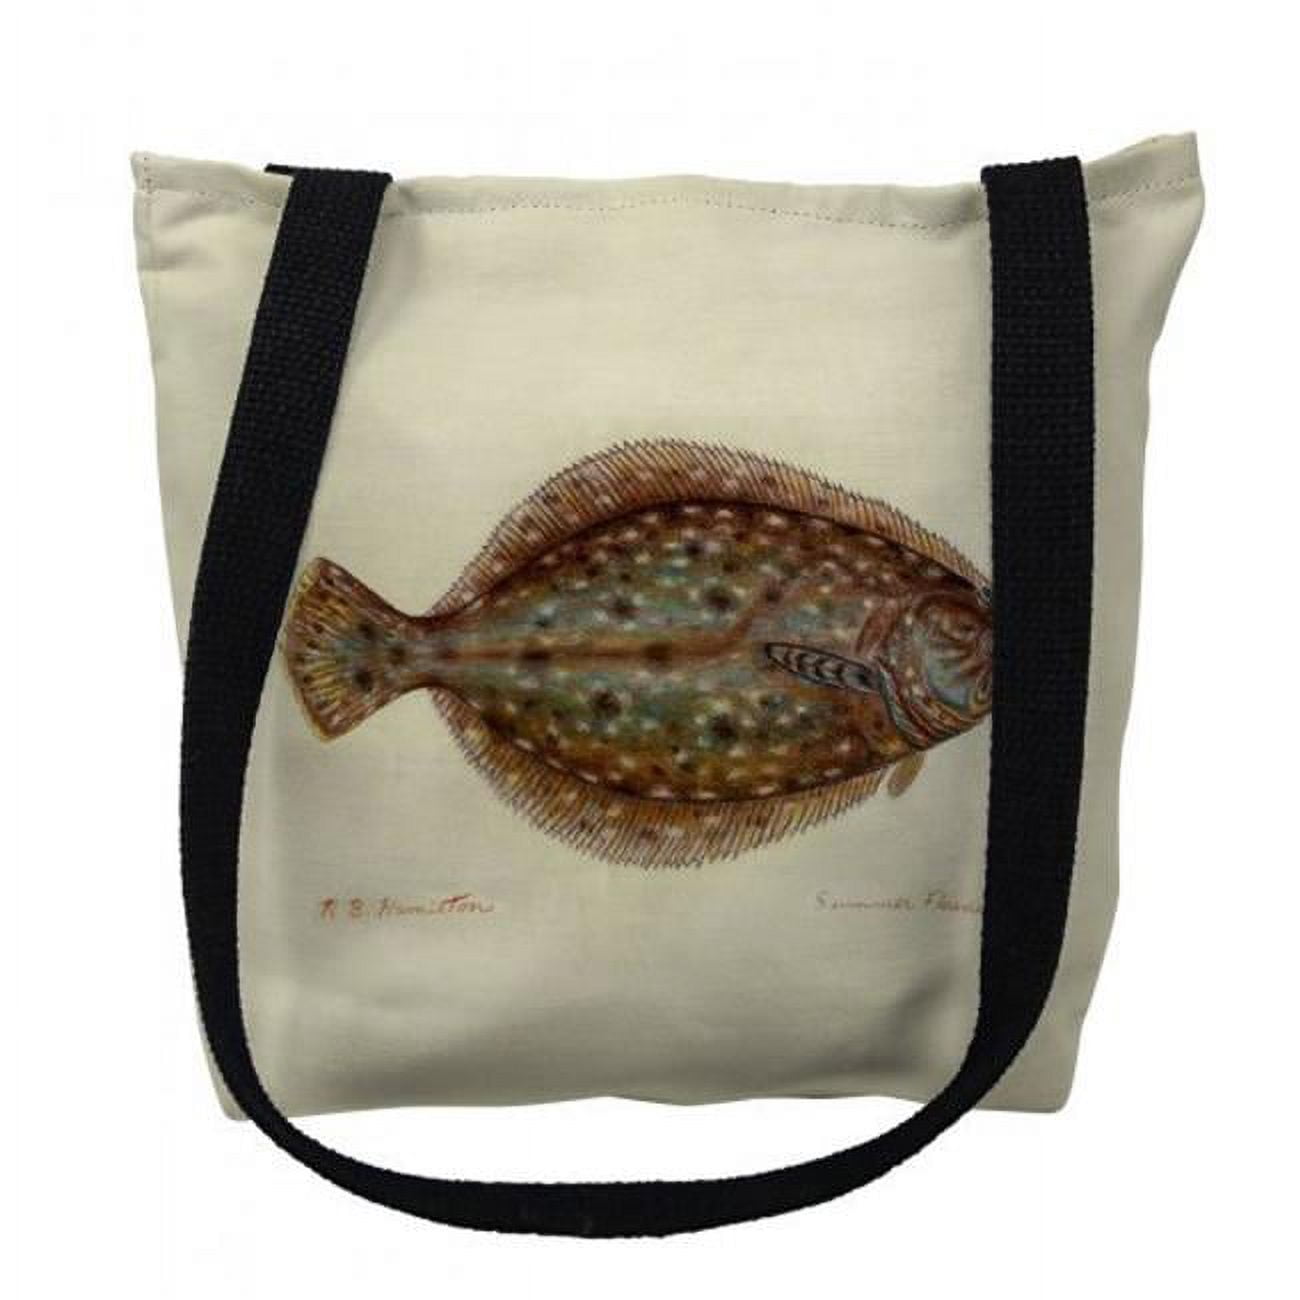 Ty014rm 16 X 16 In. Flounder Right Tote Bag - Medium